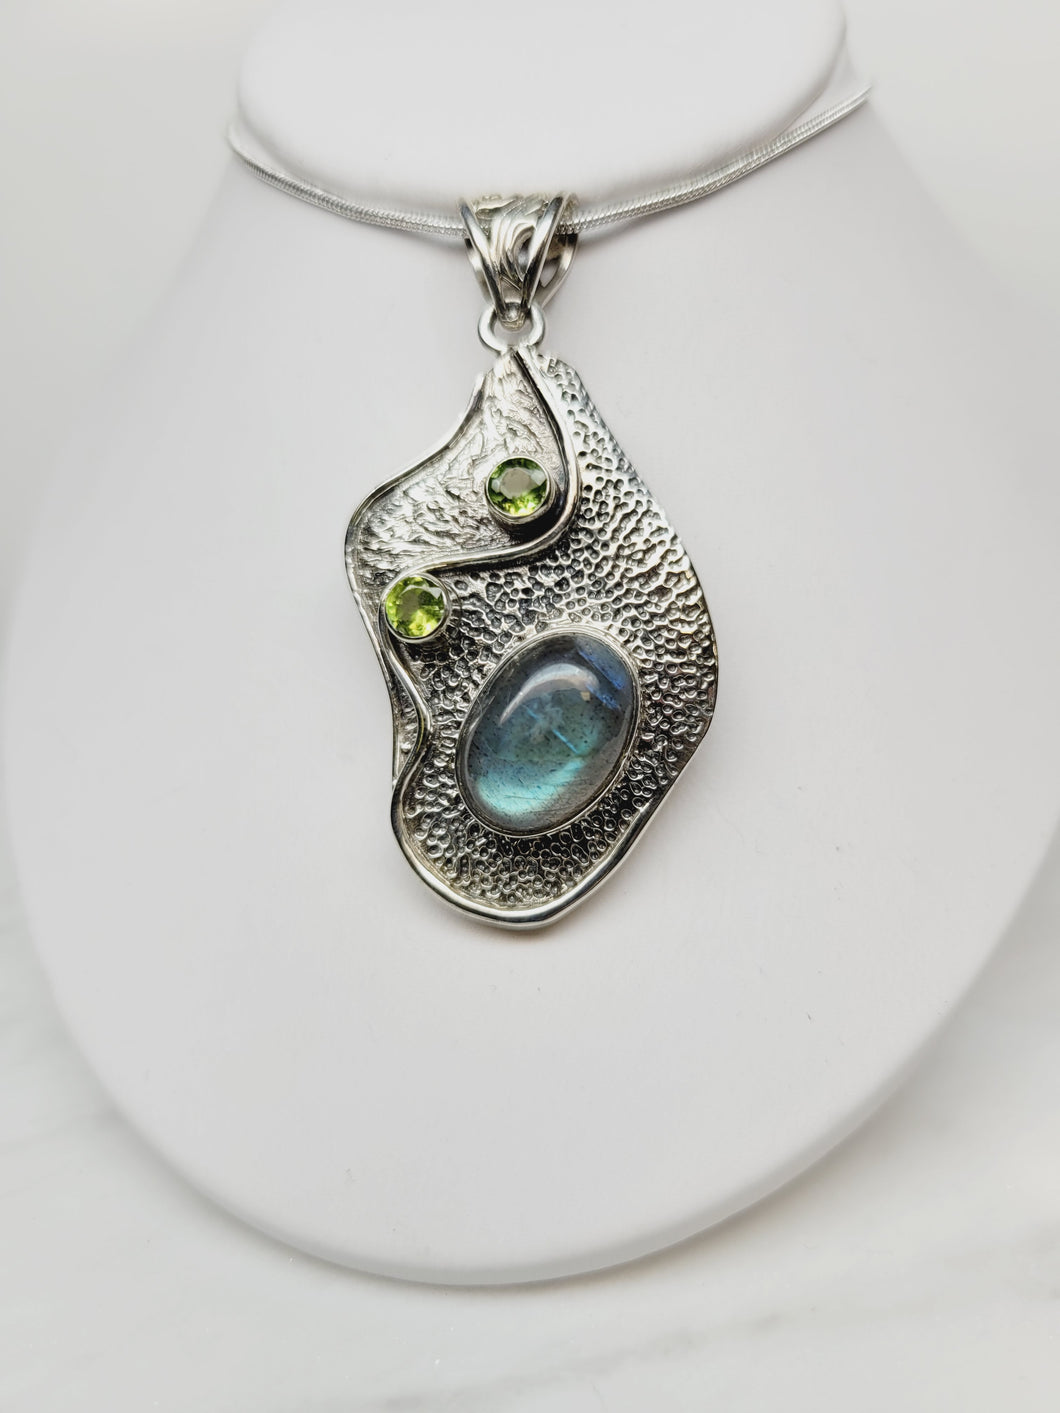 Textured sterling silver pendant with labradorite and peridot accents